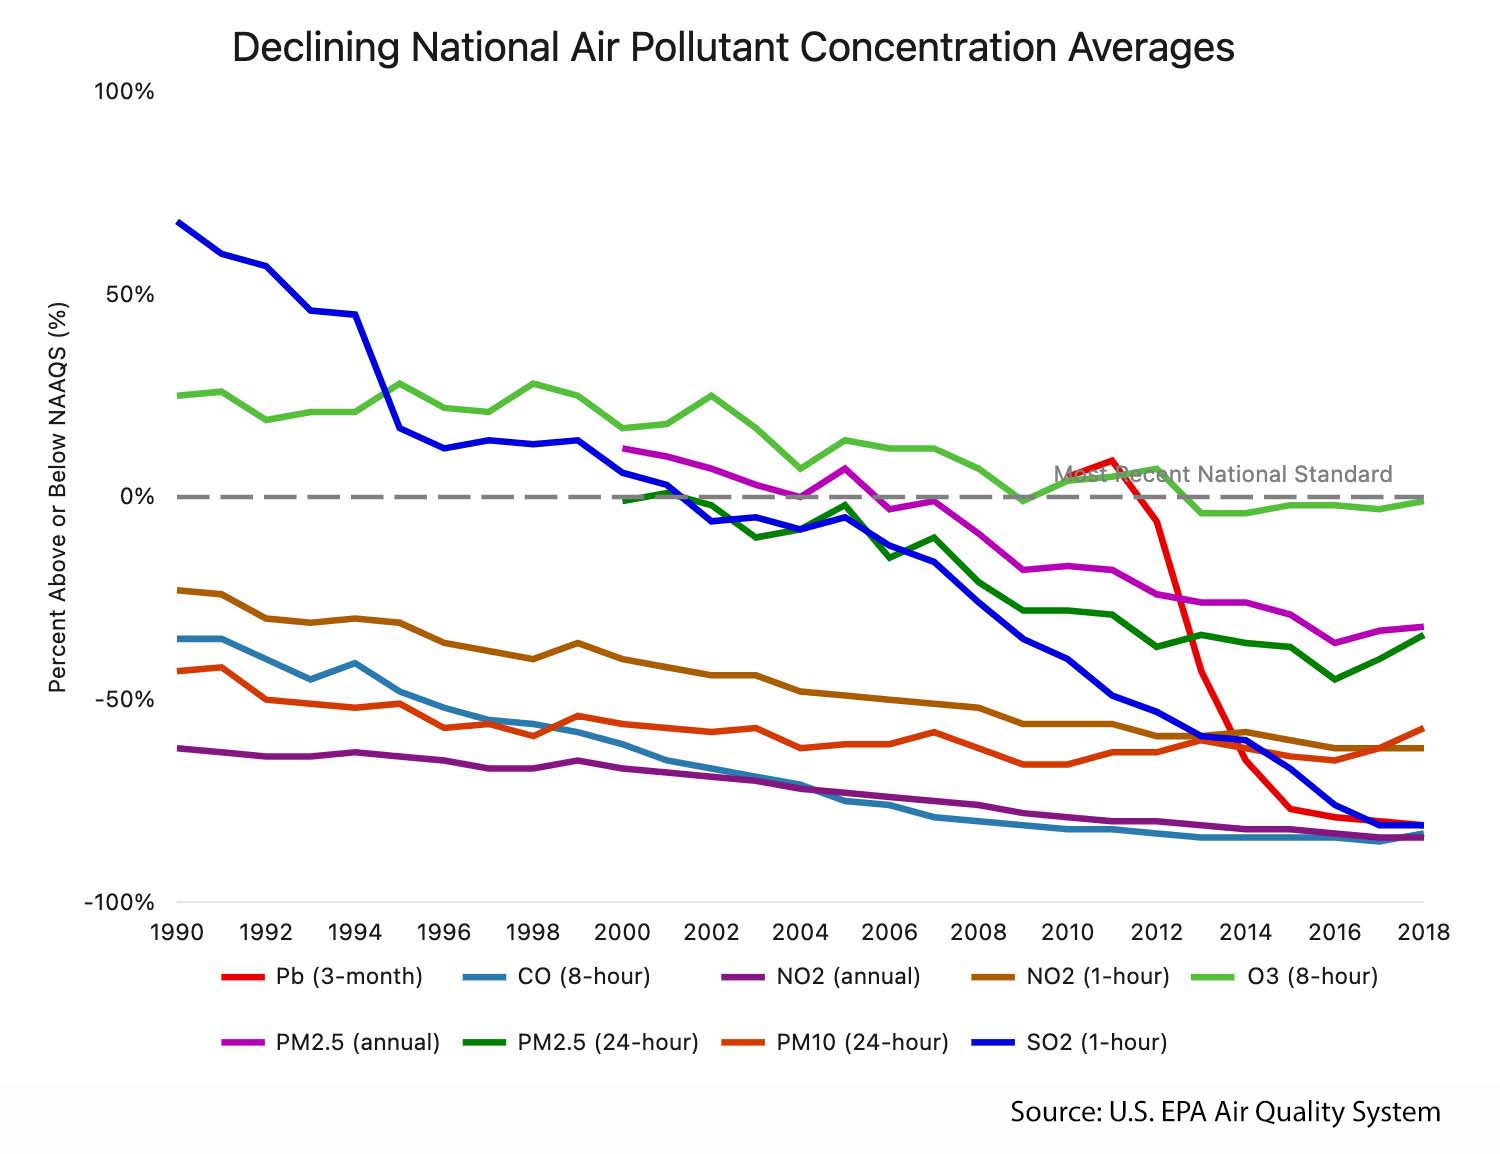 Chart by the Environmental Protection Agency showing Declining National Air Pollutant Concentration Averages from 1990-2018.